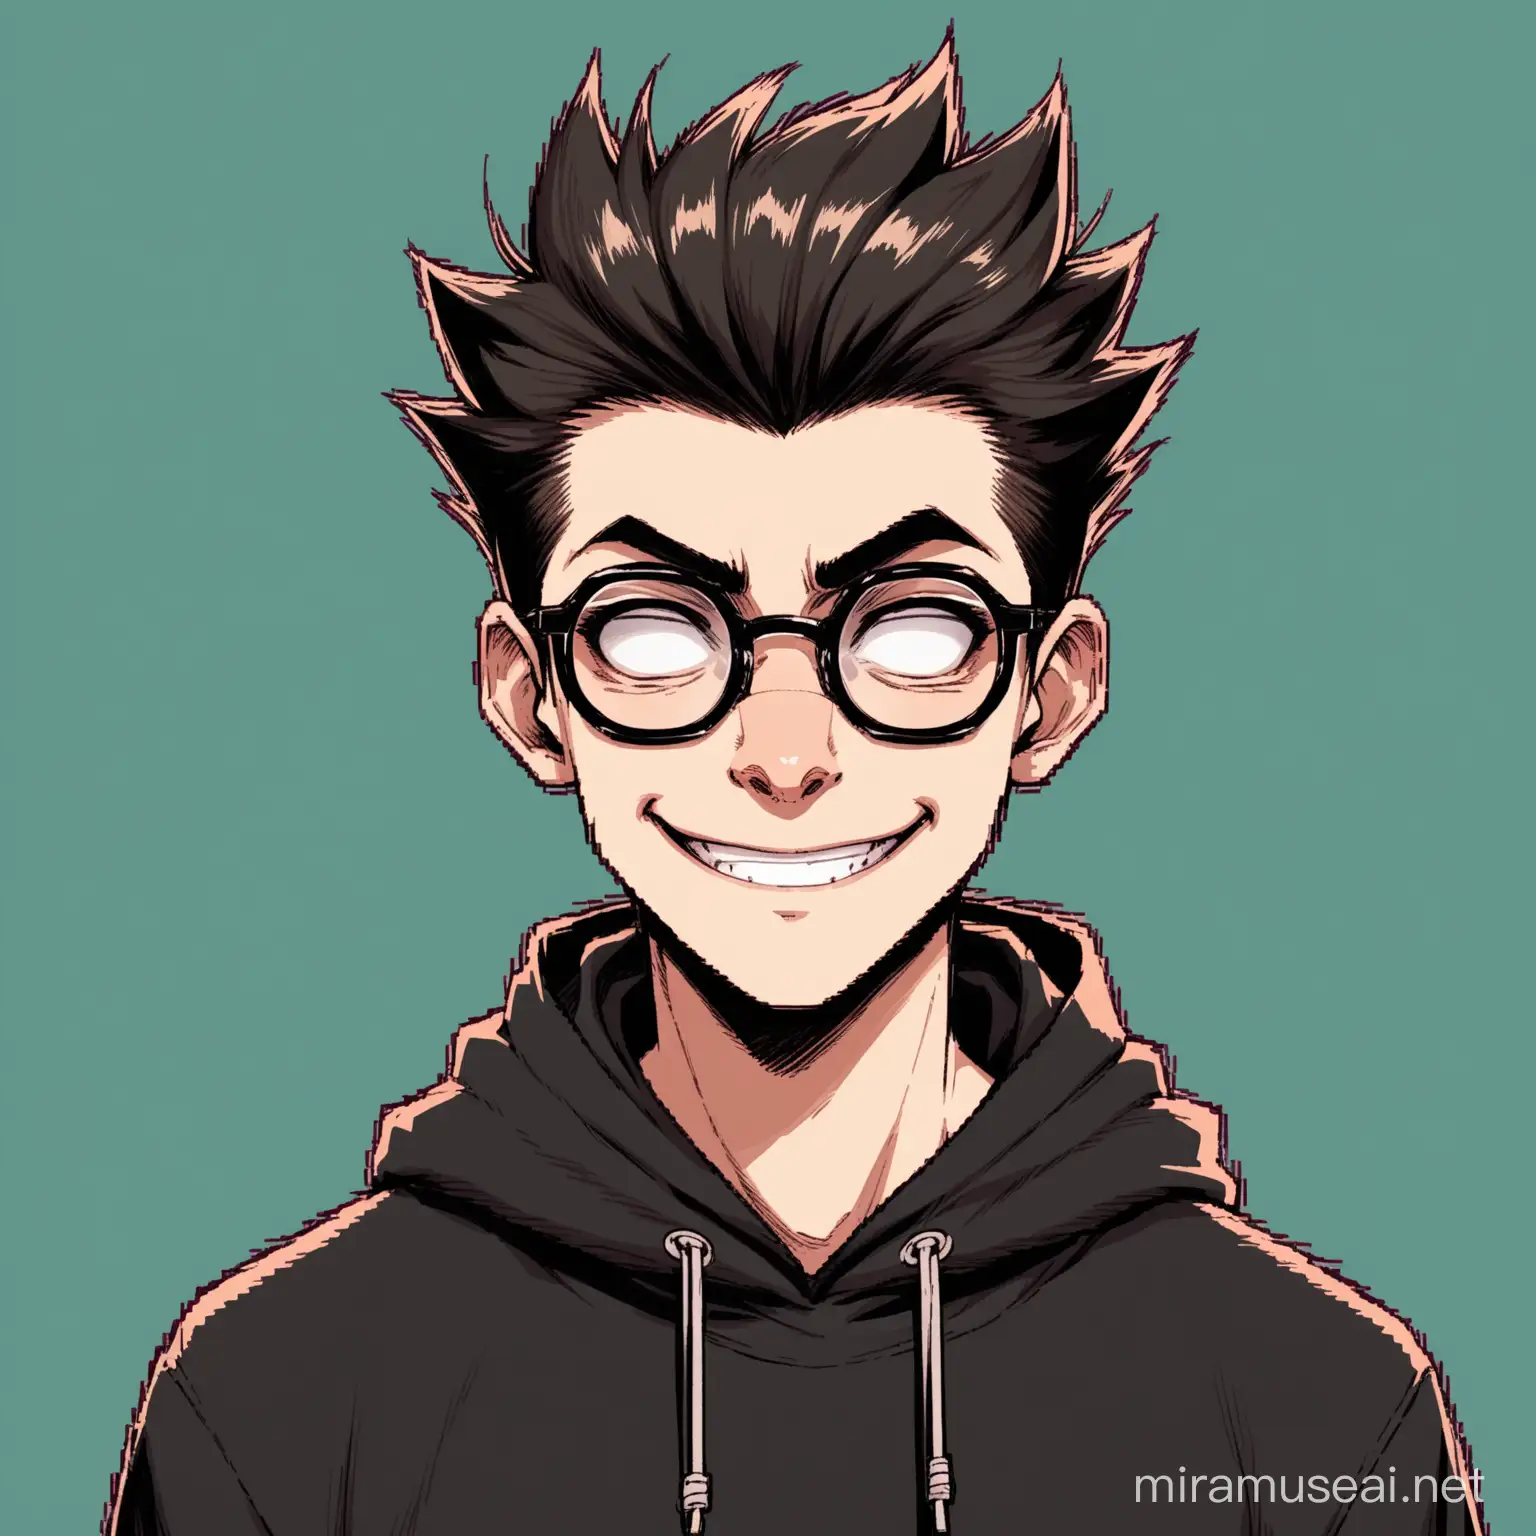 cool,hacker,black hoodie,quiff hairs,aesthetic,glasses,big nose,small mouth,handosme,oblong face shape,psycho smile

